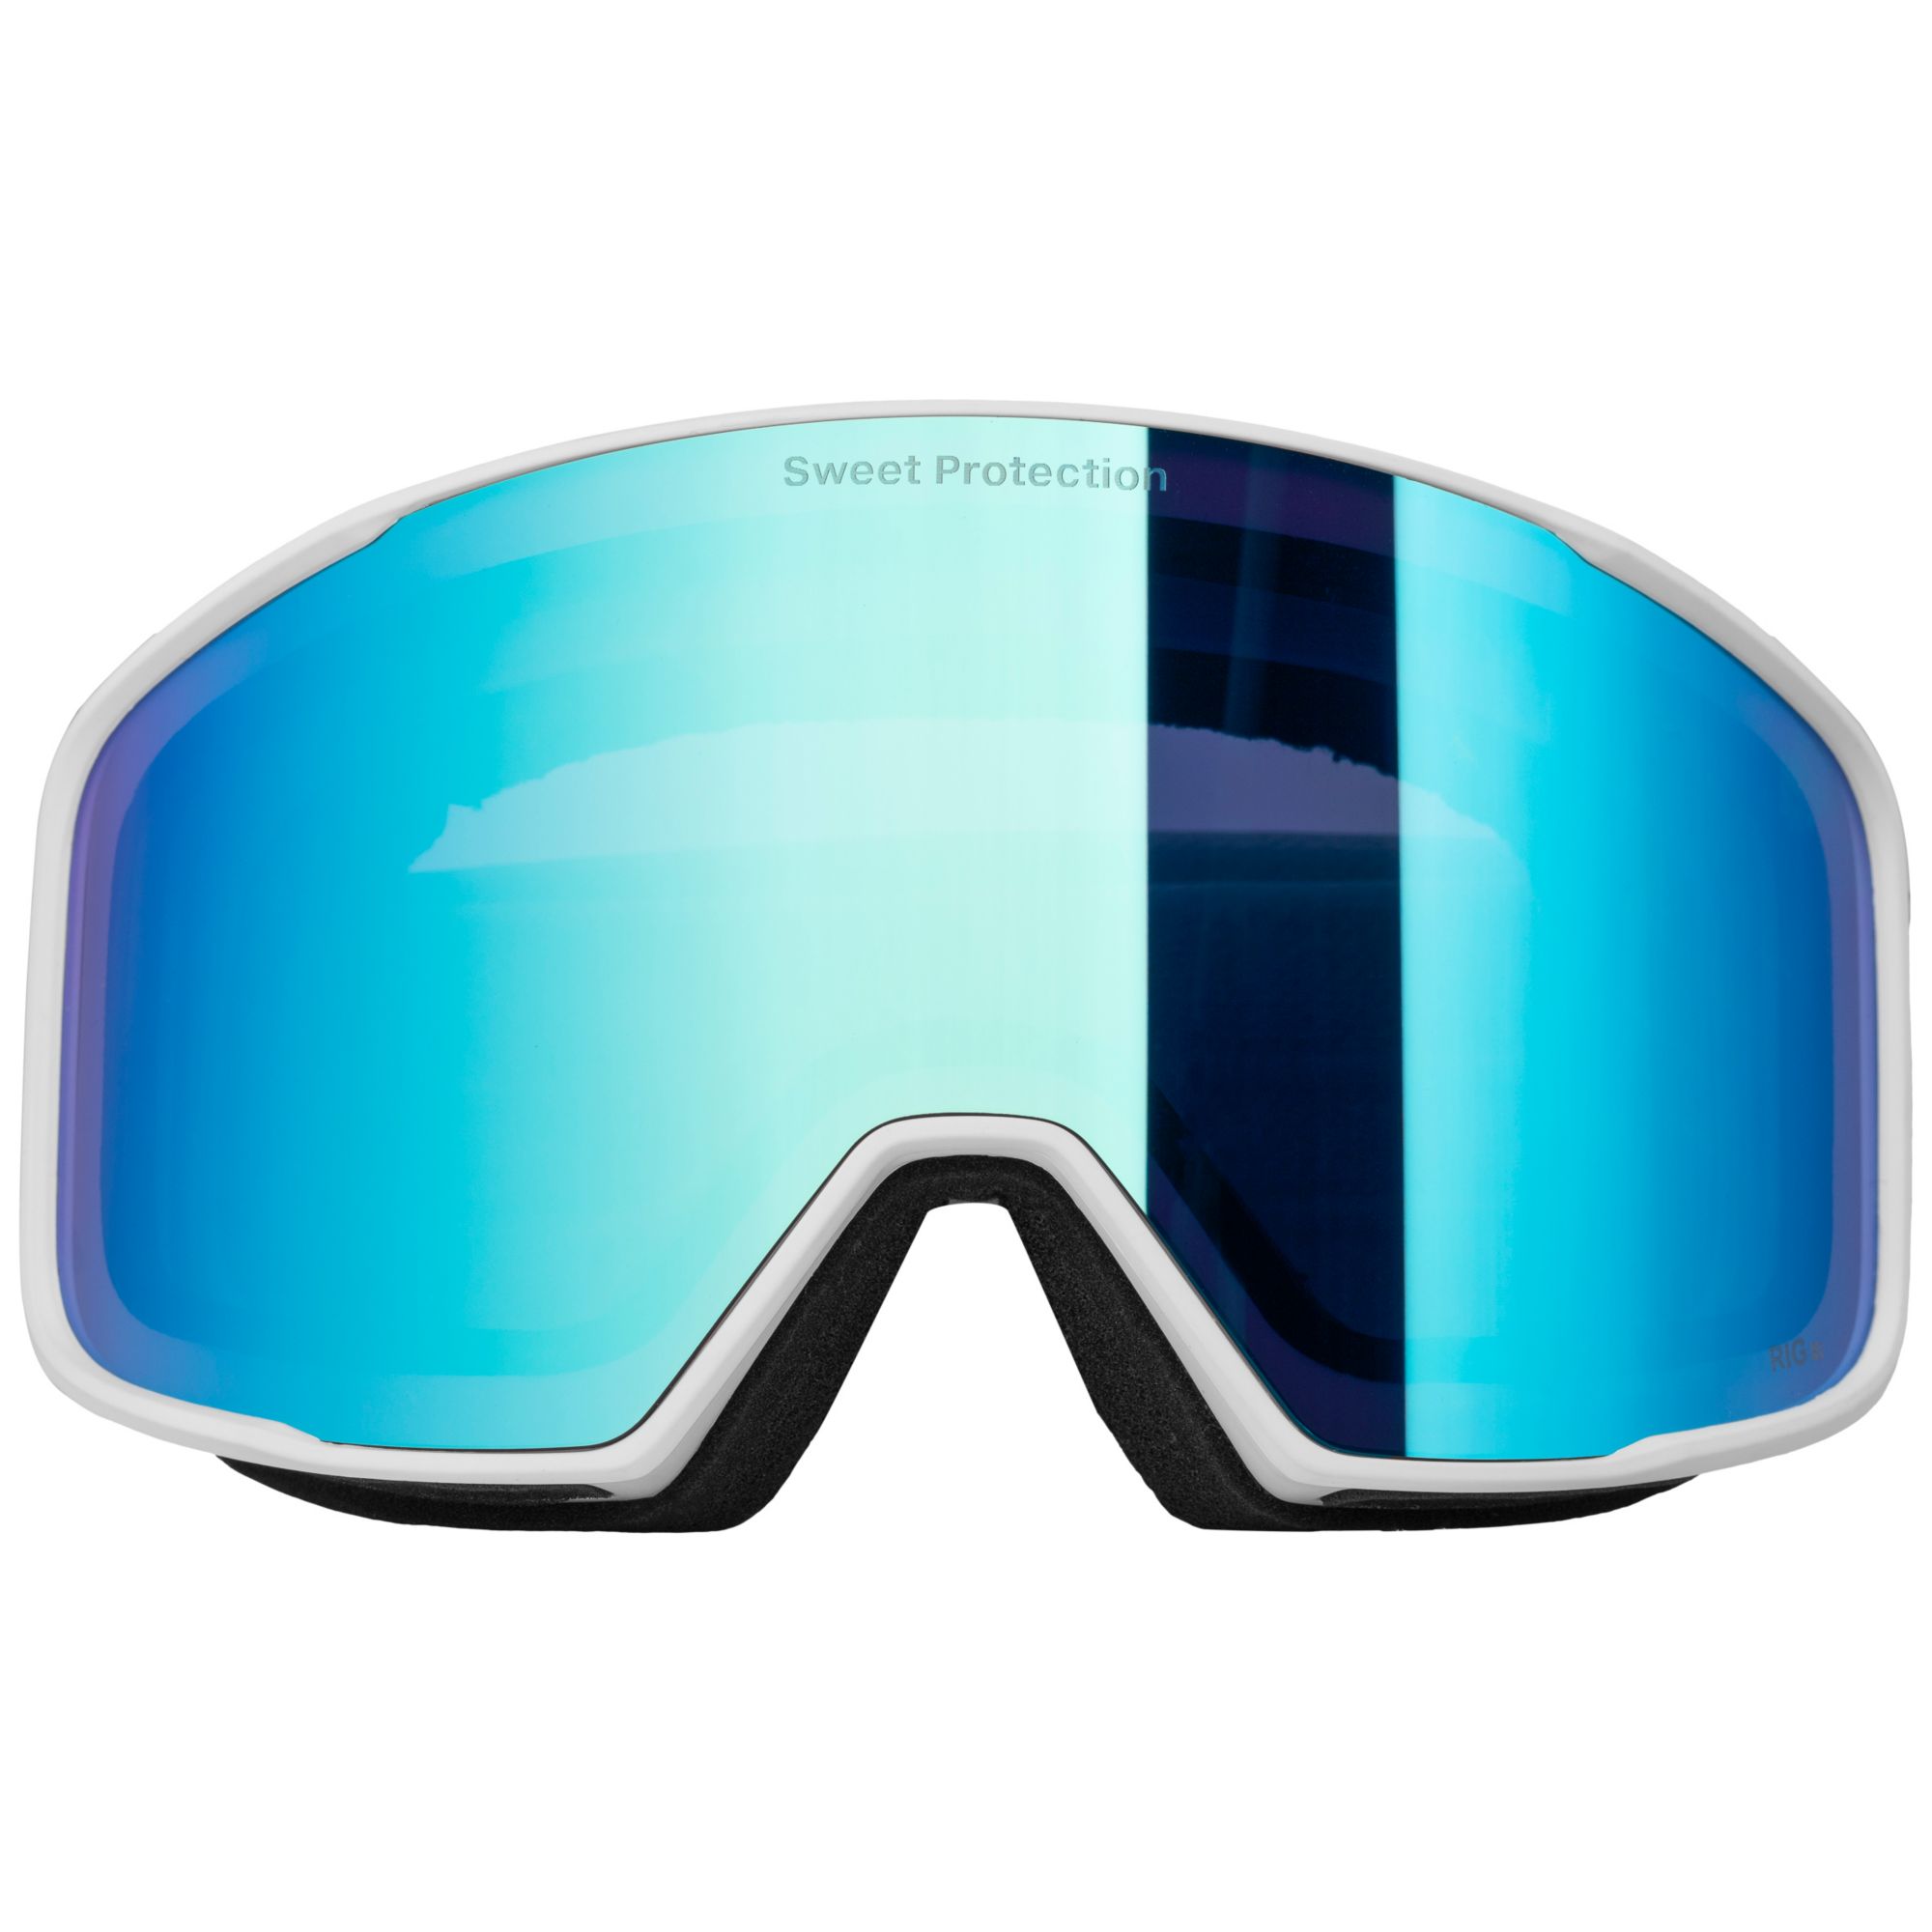 Photos - Ski Goggles Sweet Protection Unisex Boondock RIG® Reflect Goggles with Extra Lens, Rig 